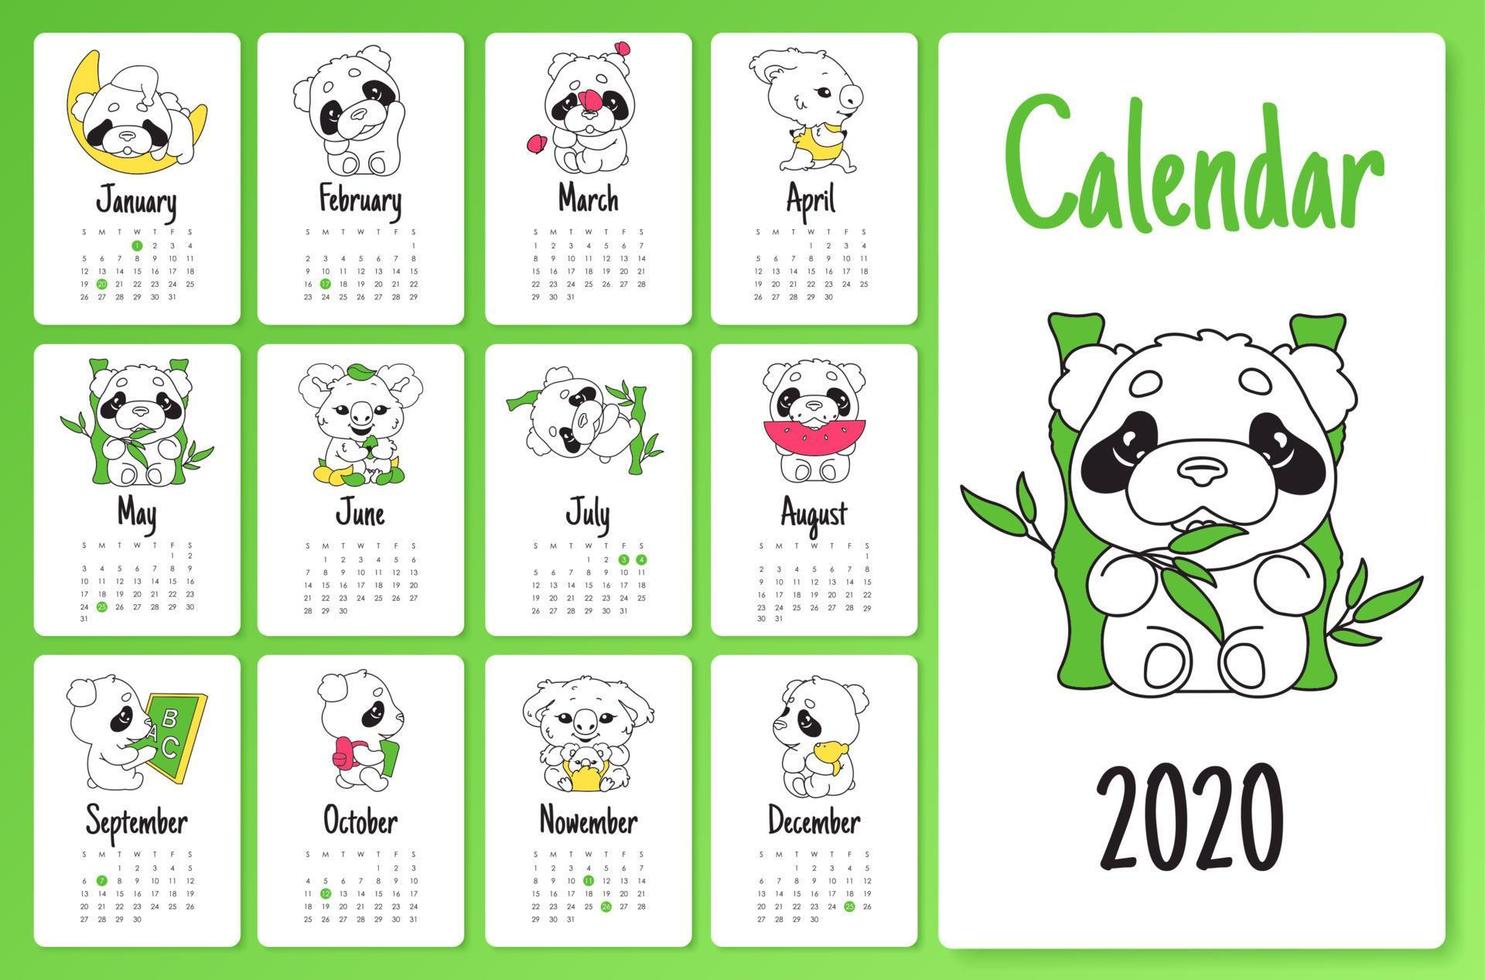 Cute sloth and panda 2020 calendar design template with cartoon kawaii characters. Wall poster, calender creative pages layout pack. Childish, girlish month planner mockup with doodle vector animals